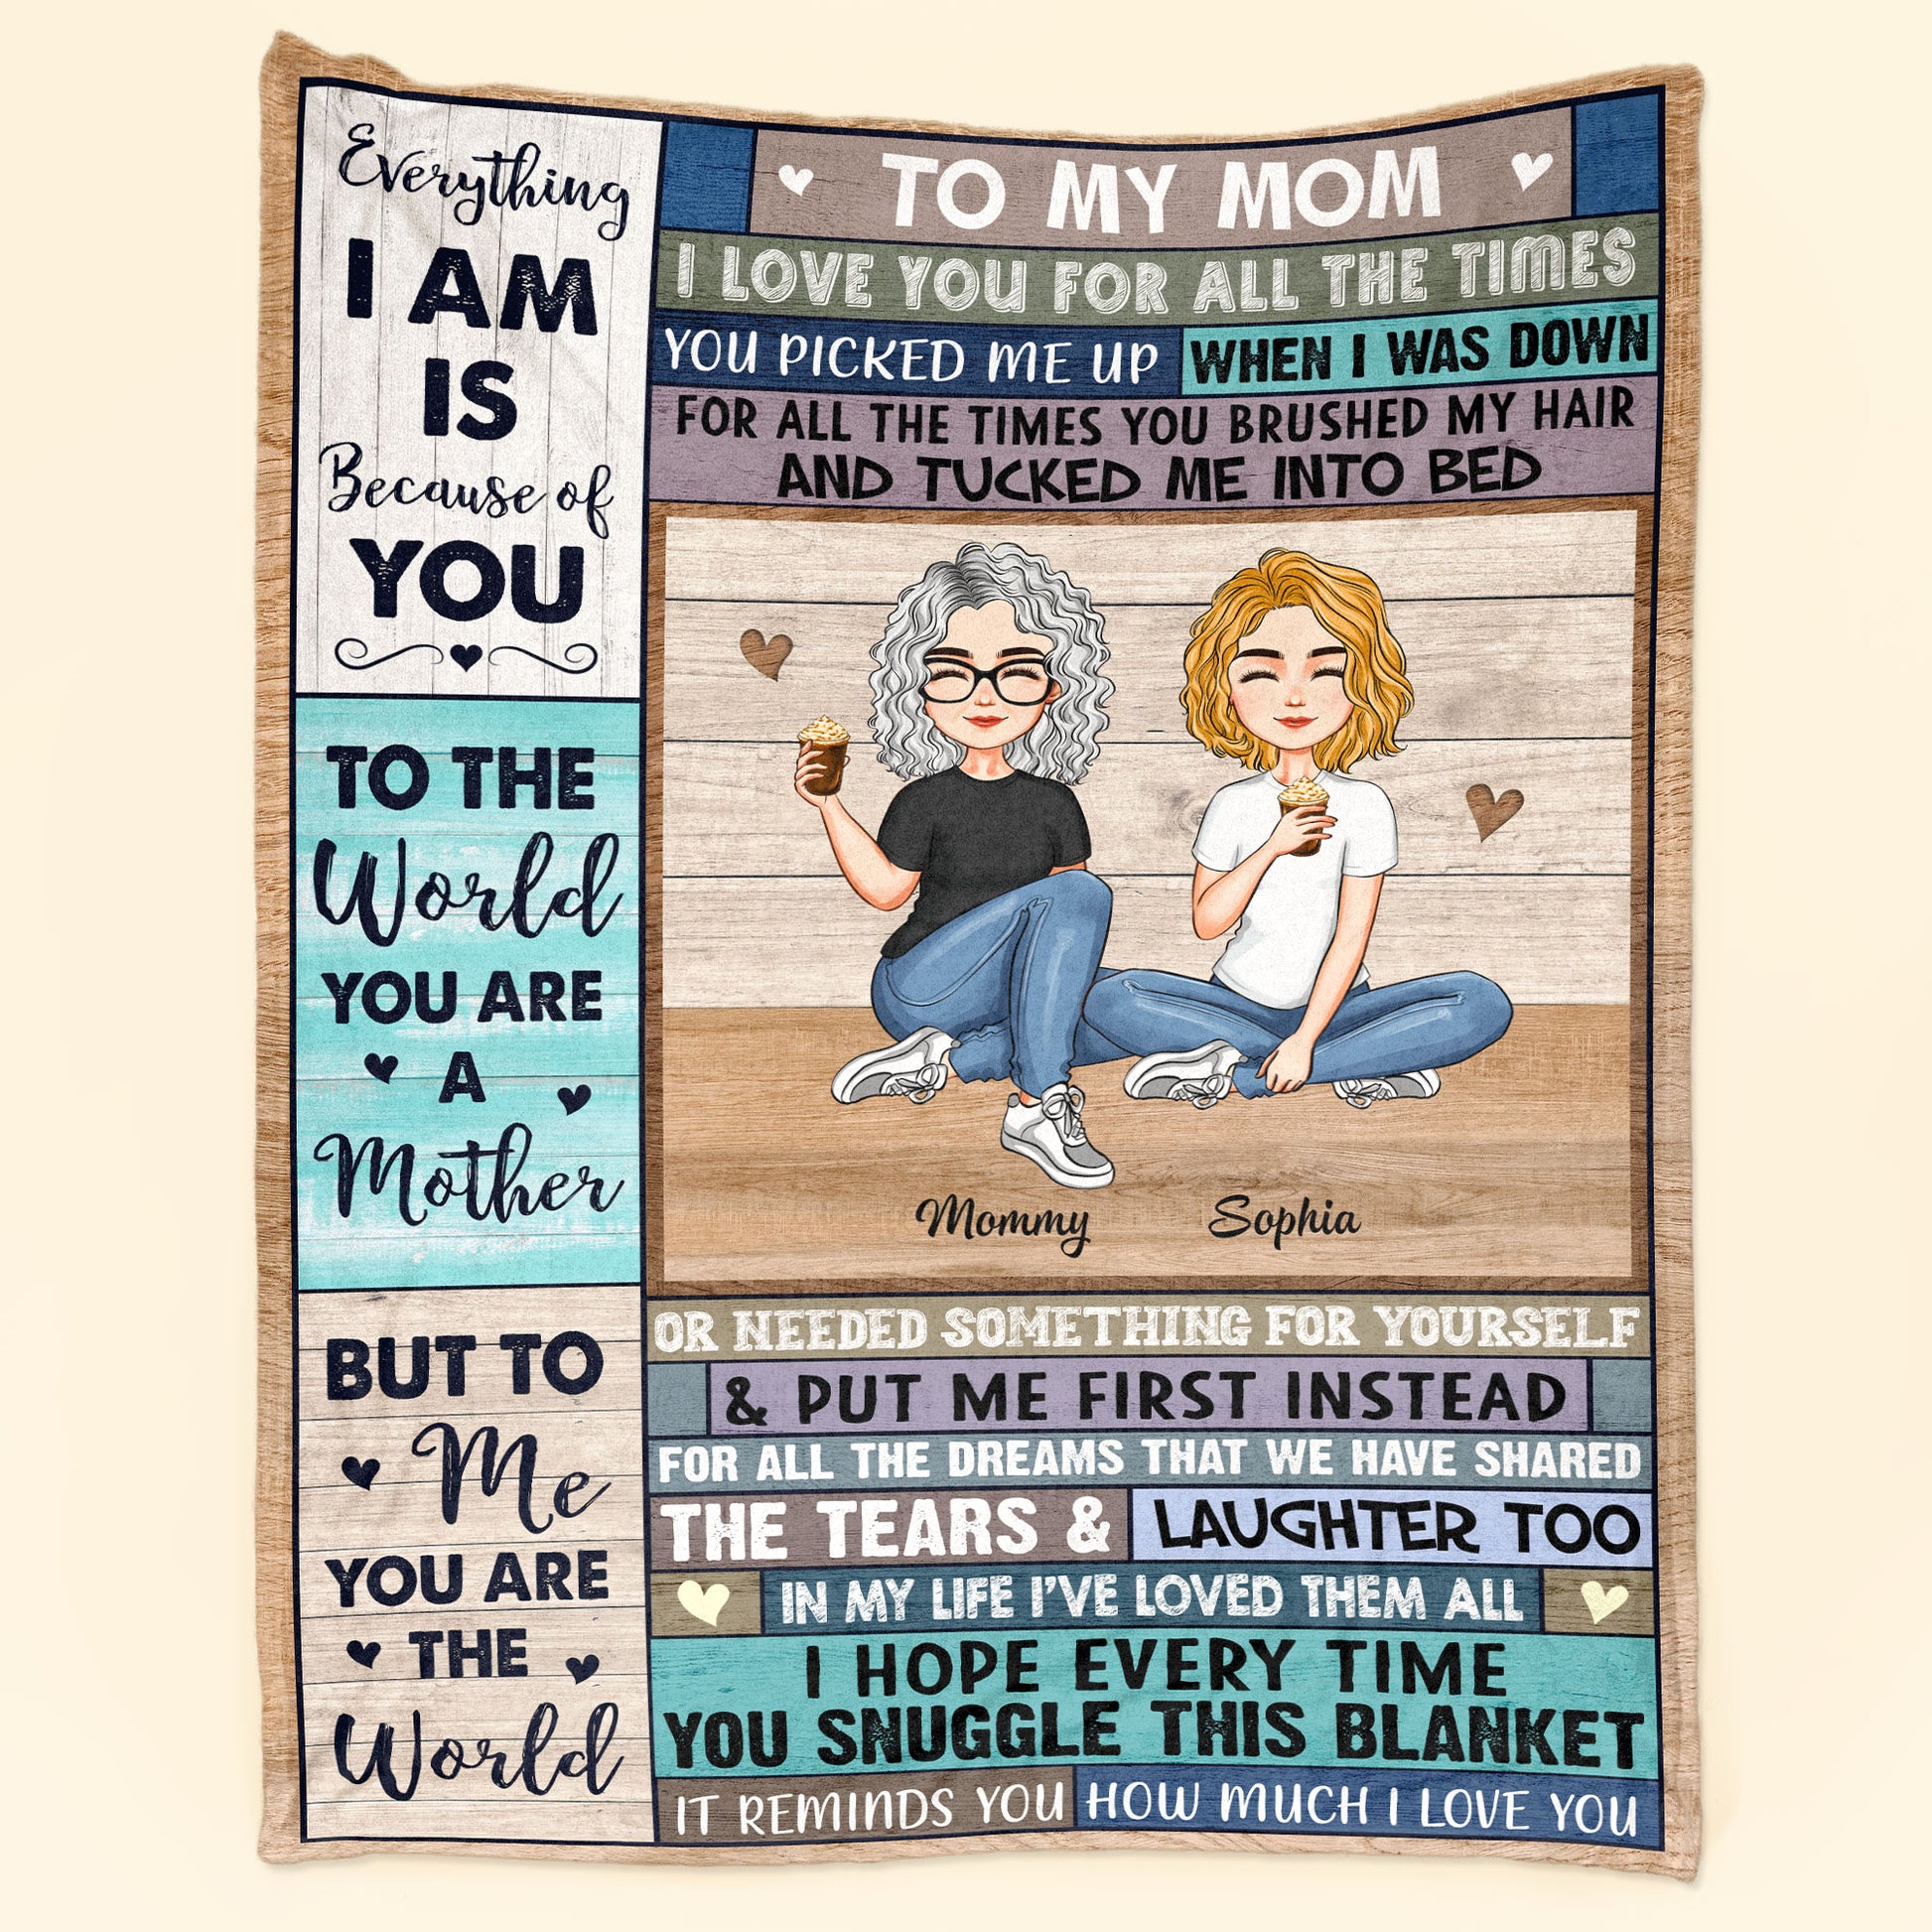 This Cozy Blanket Reminds You How Much We Love You - Personalized Blanket - Christmas, New Year, Loving Gift Gift For Mom, Mother, Mama